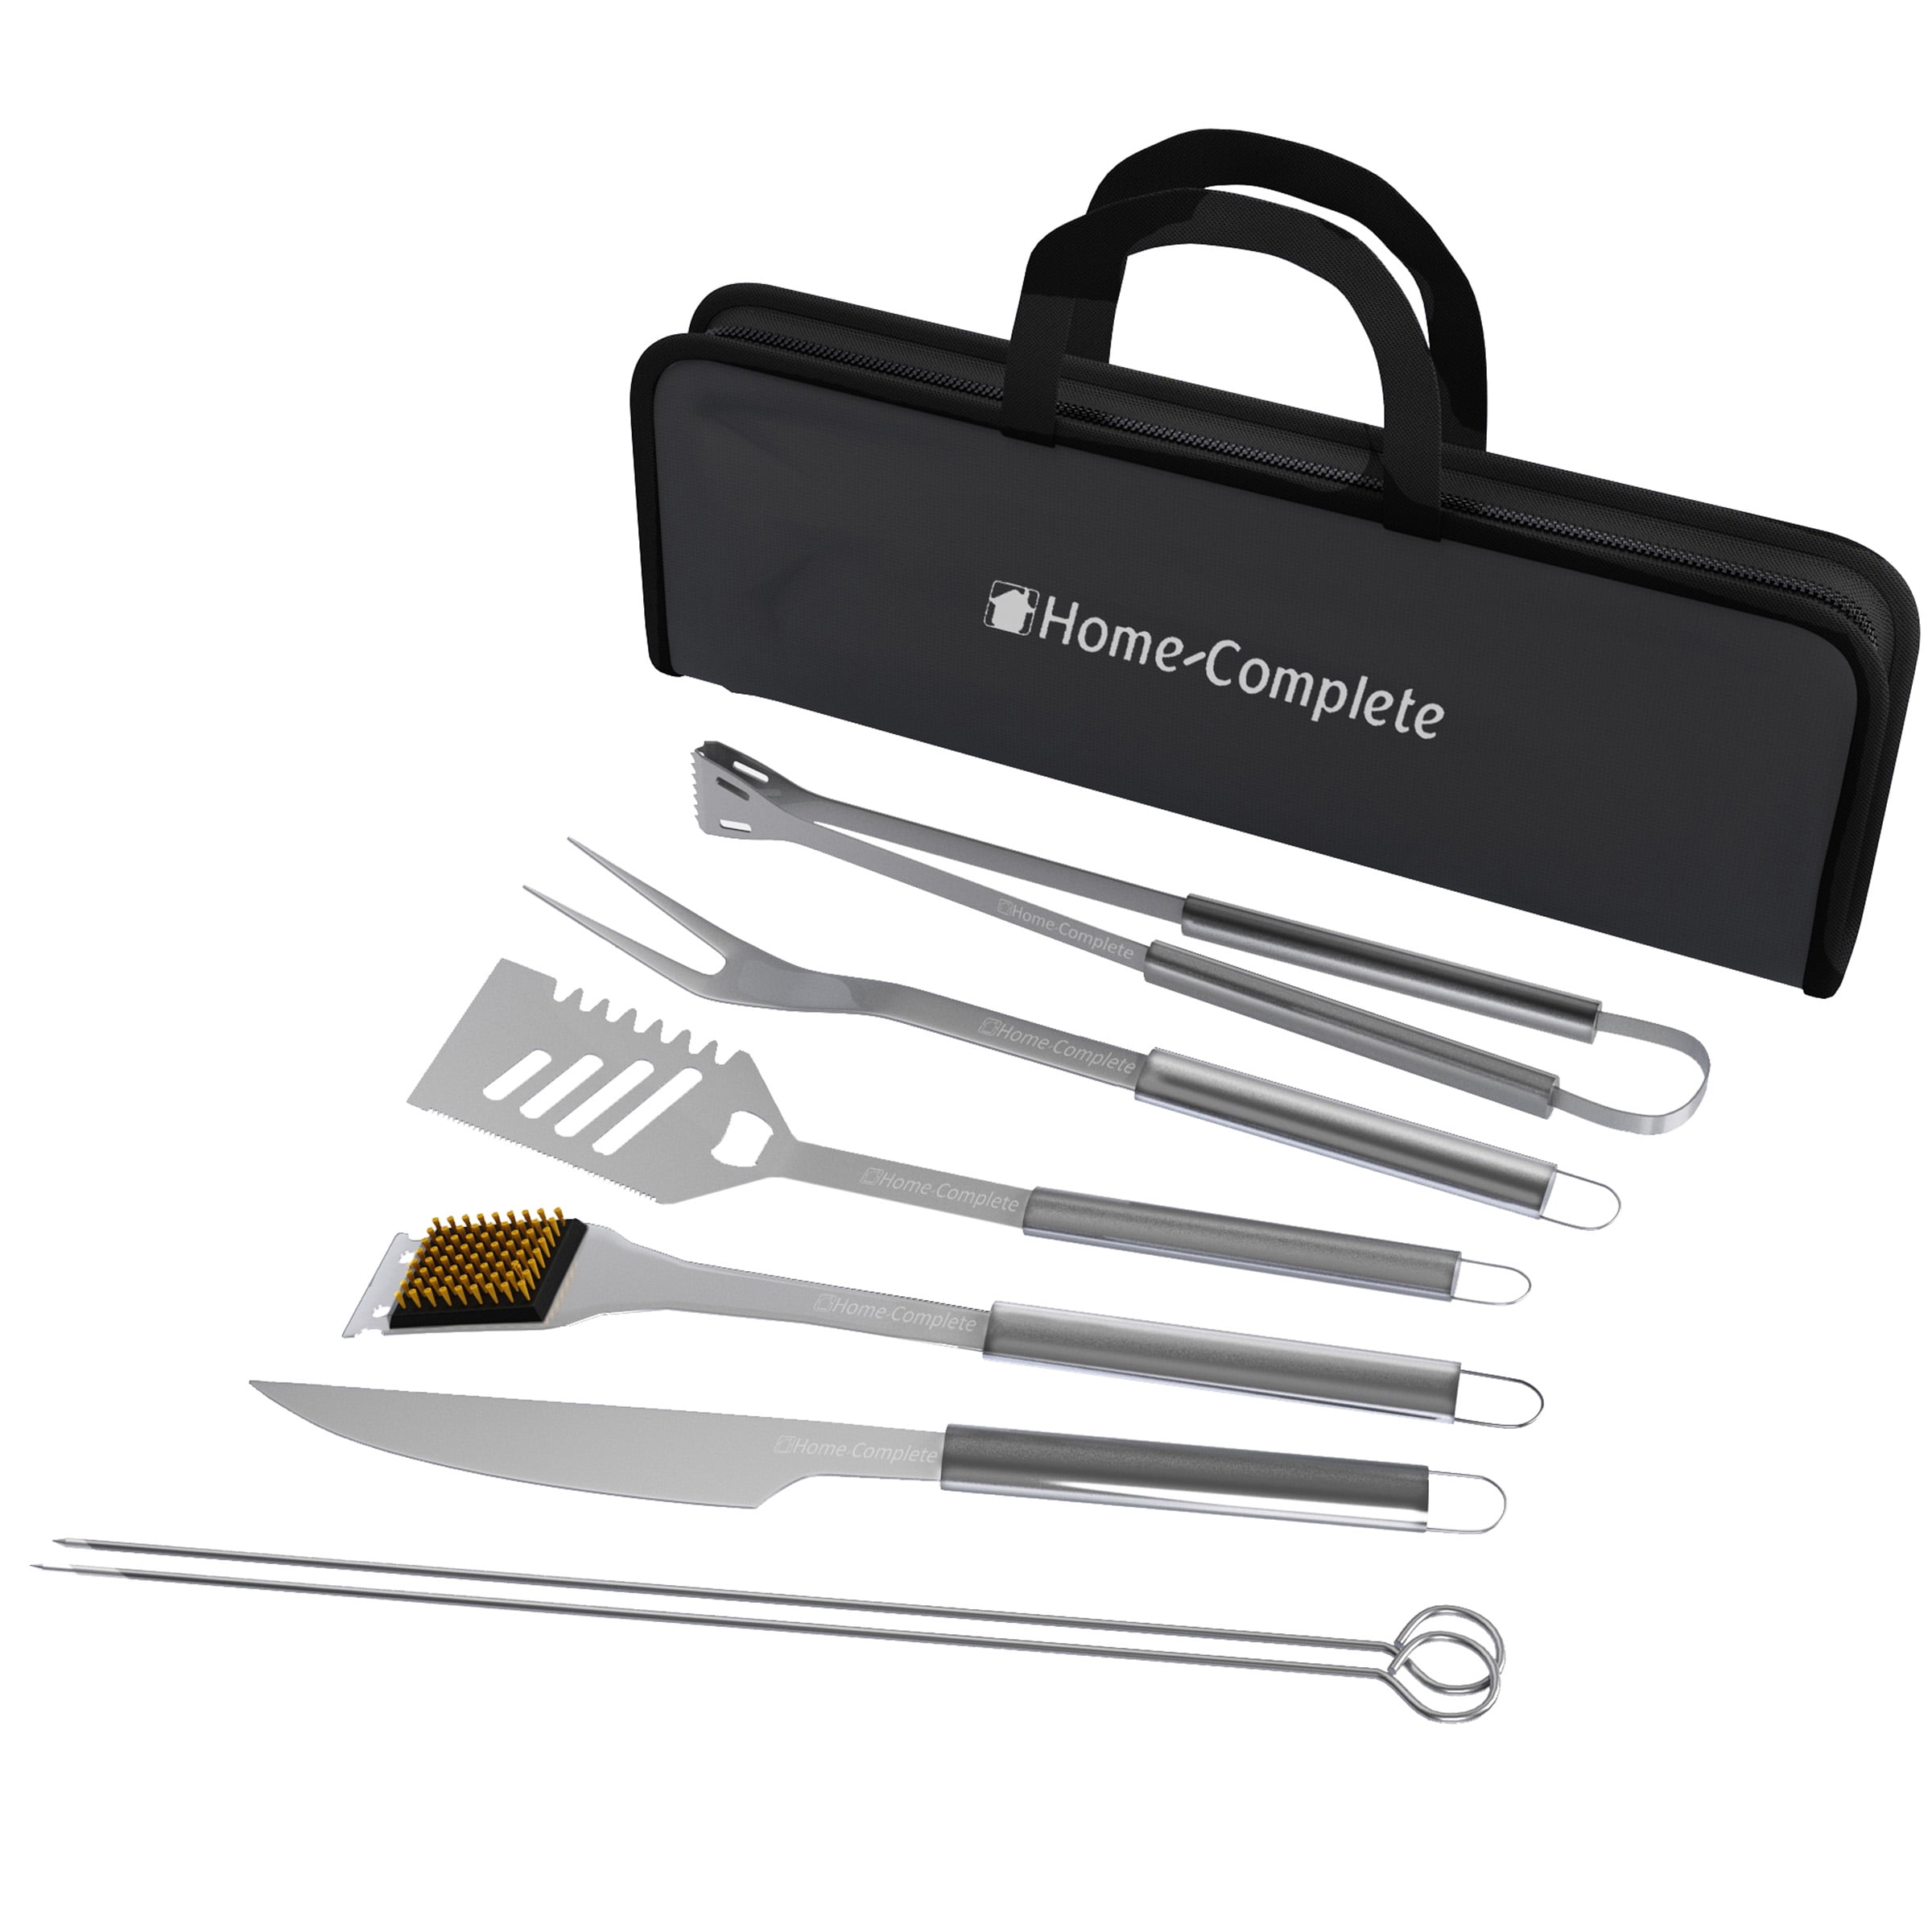 Yukon Glory Magnetic BBQ Grilling Tools Set, Extra Heavy Duty Stainless  Steel with Powerful Embedded Magnets Allows Convenient Placement